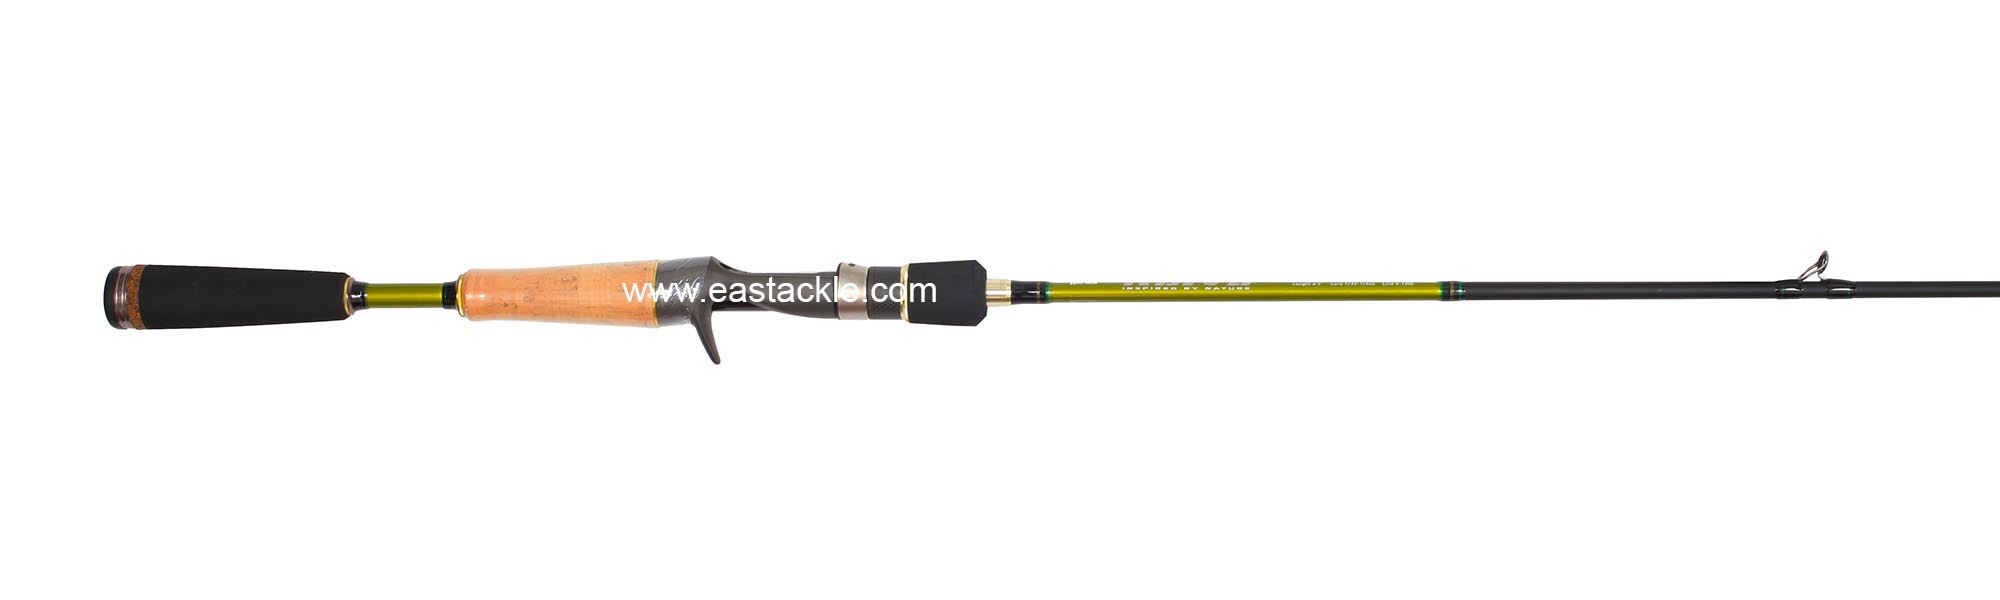 Rapala - Koivu - KVC651M - Bait Casting Rod - Butt to Stripper Guide (Side View) | Eastackle